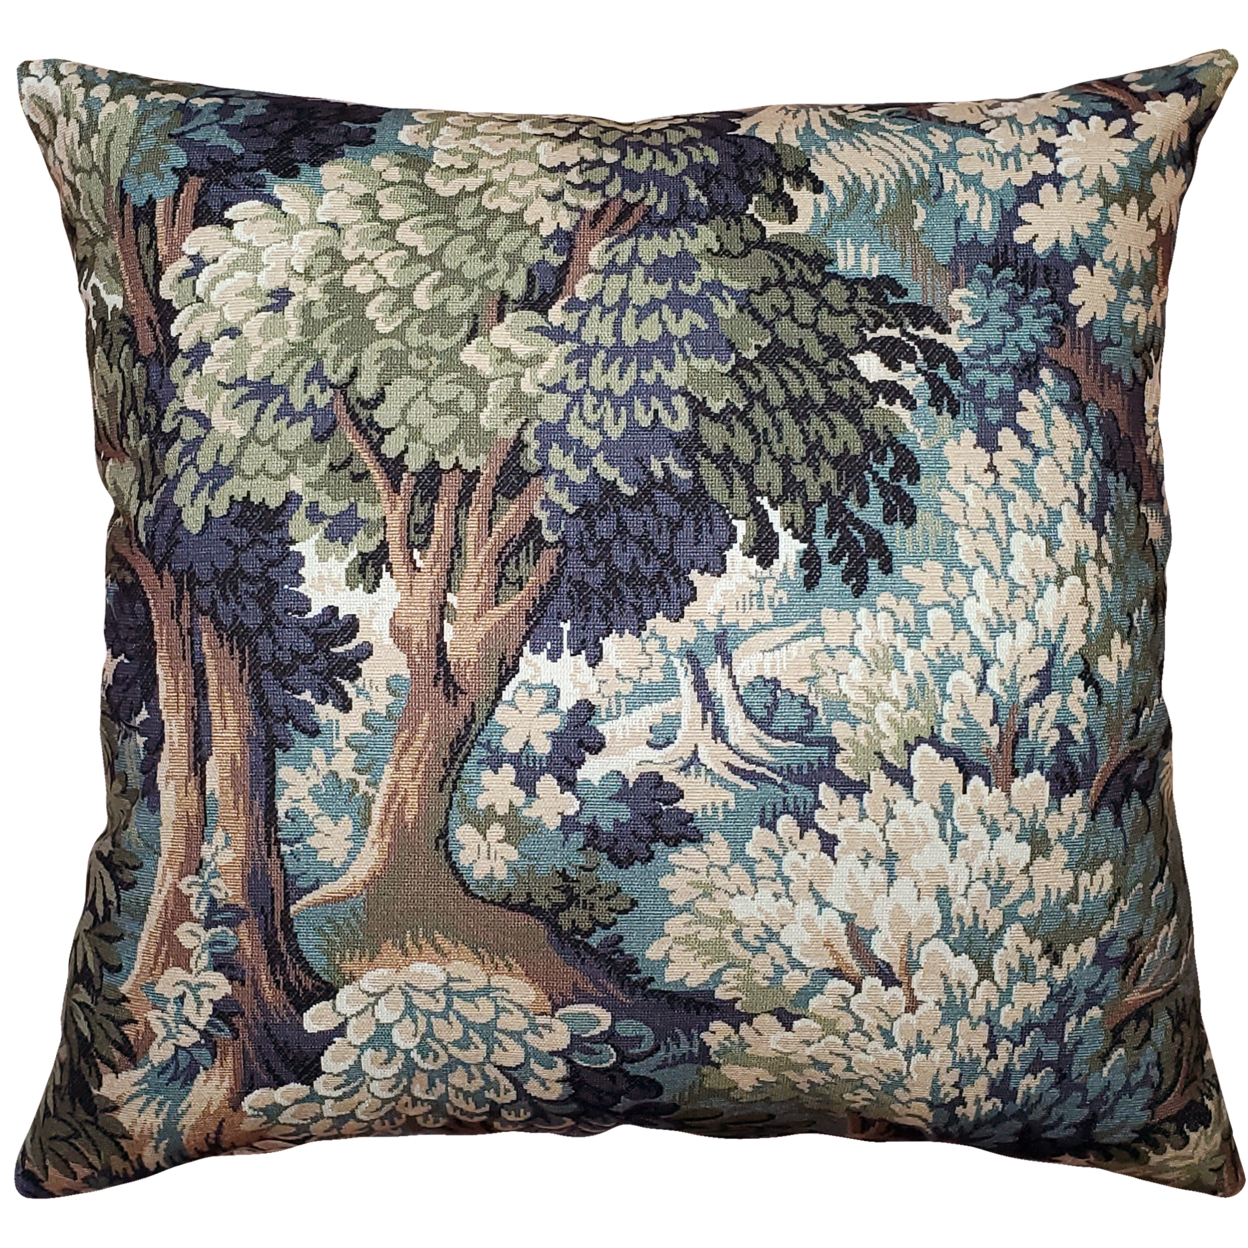 Somerset Woods By Day Throw Pillow 20x20, With Polyfill Insert